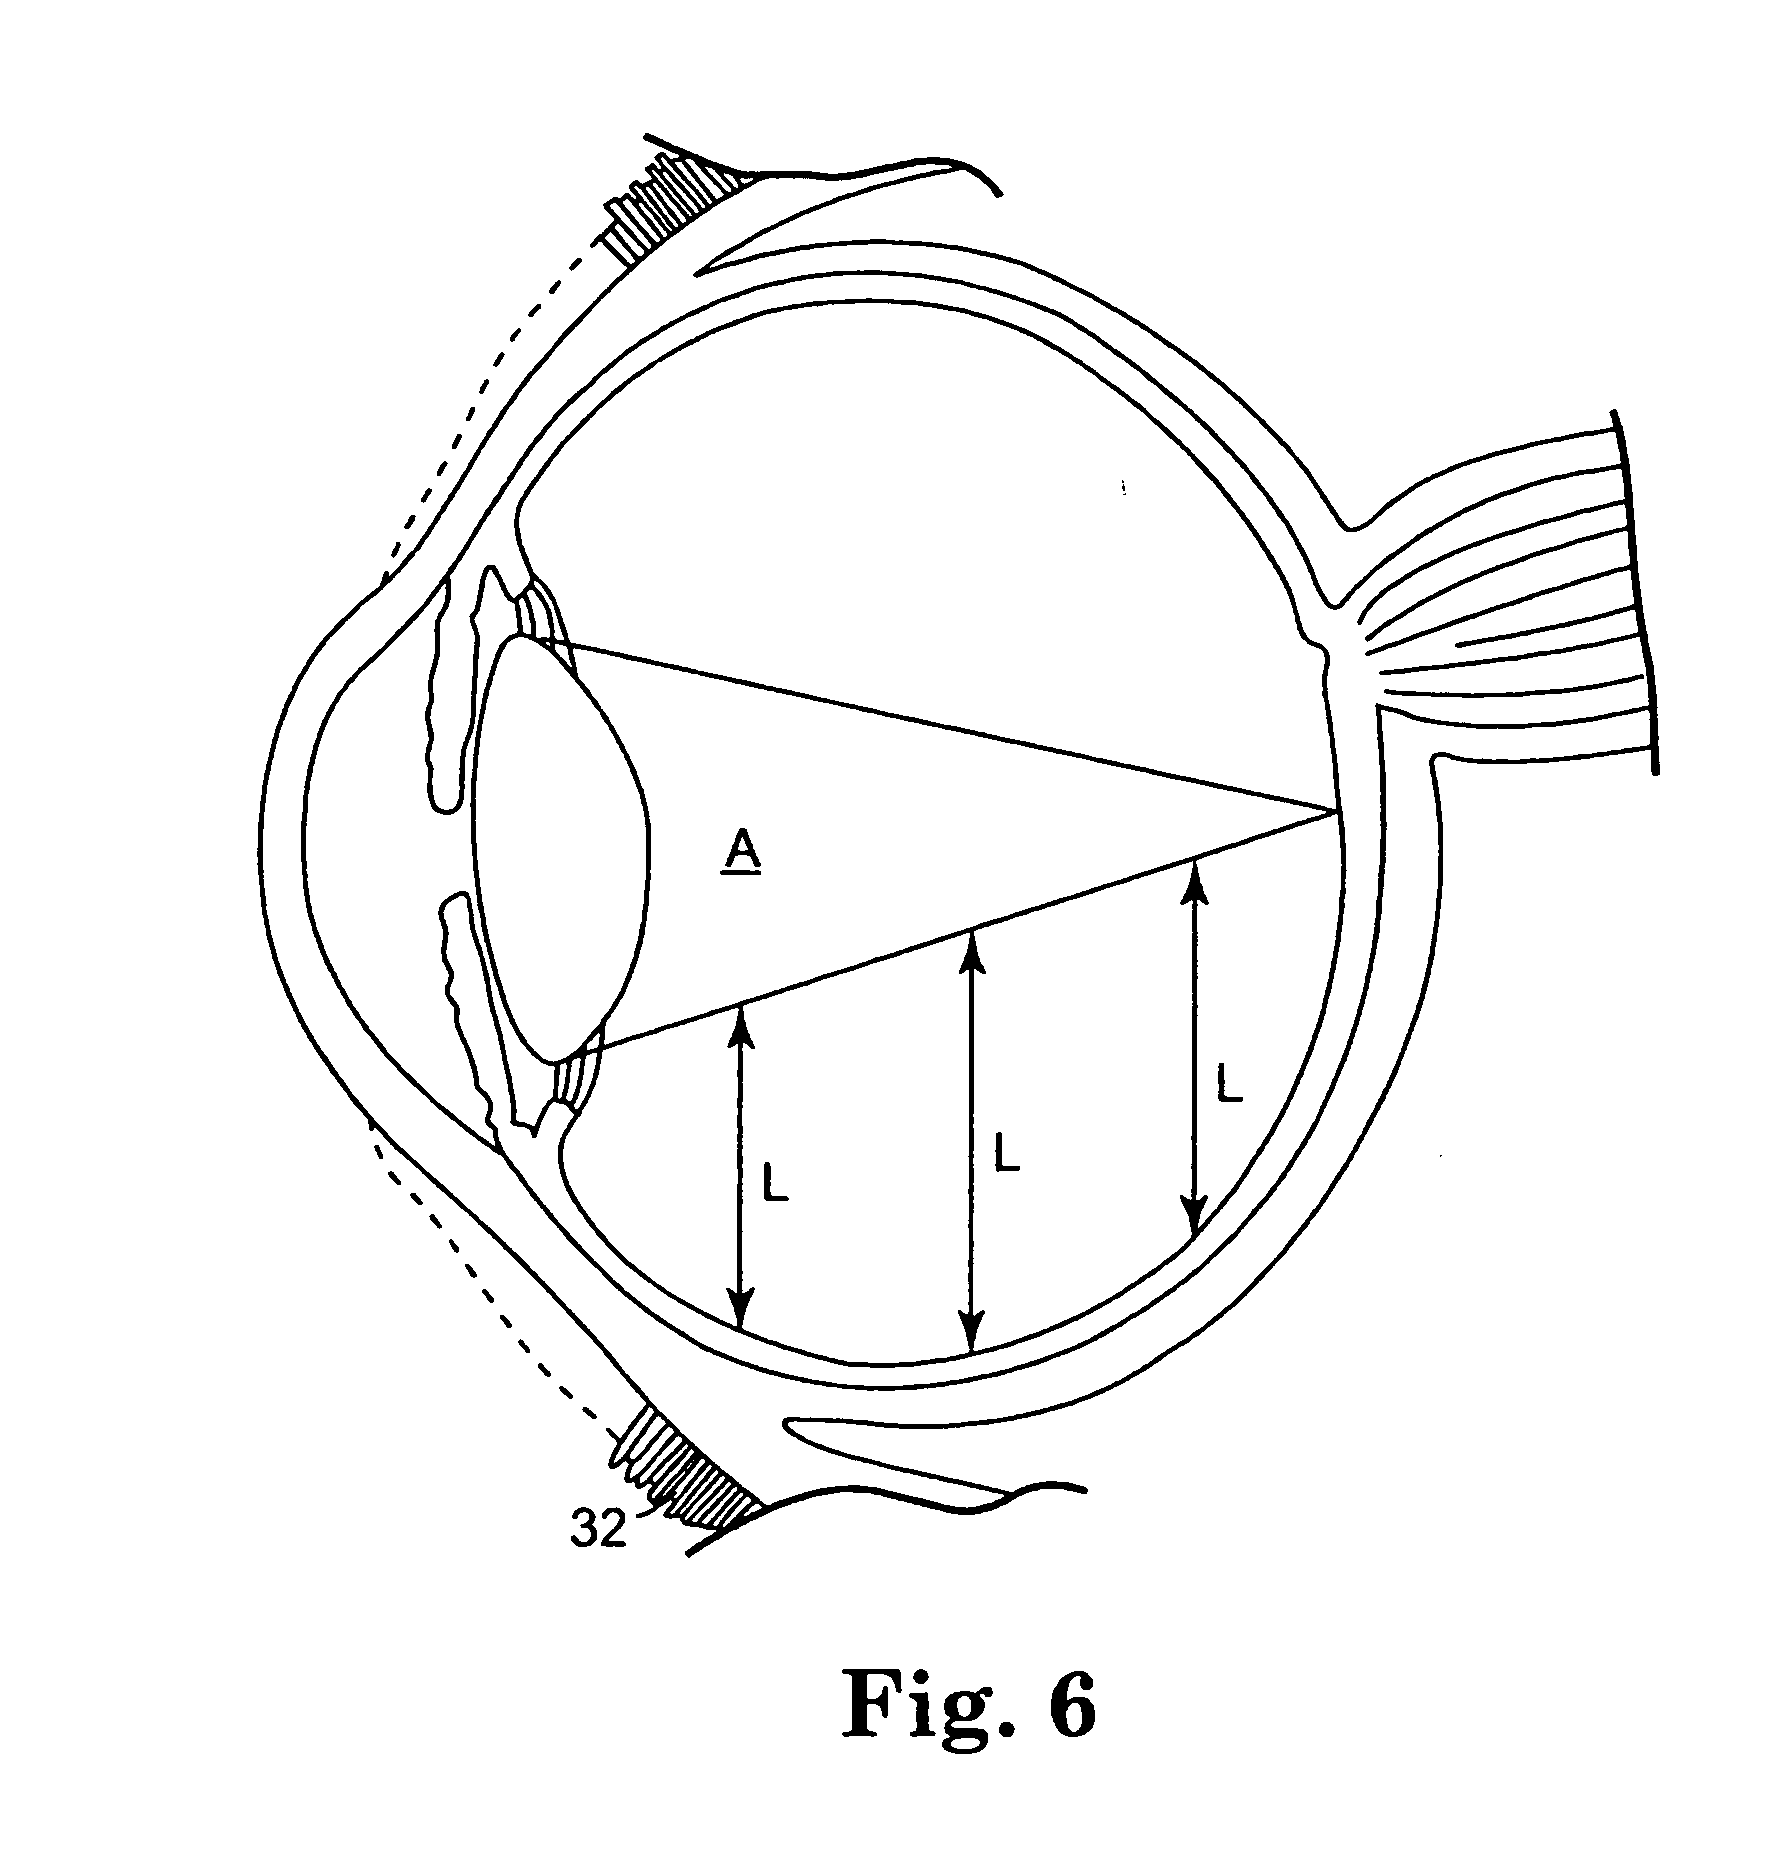 Controlled release bioactive agent delivery device